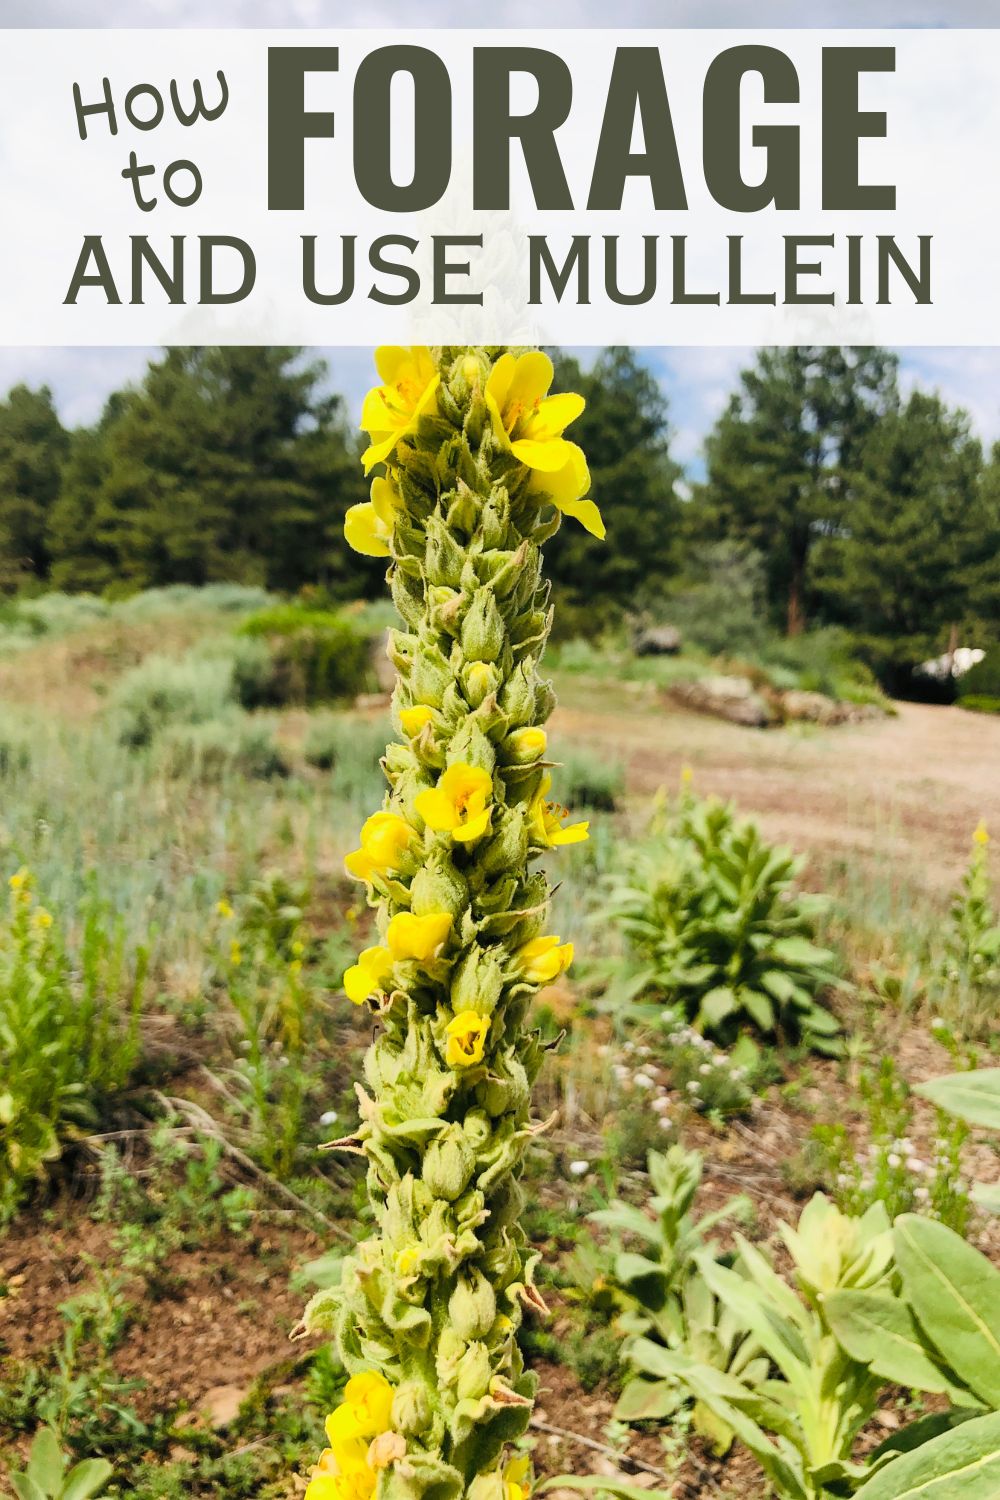 Mullein is a very common wild weed that is medicinal as well as edible -- it's actually a wonderful wild weed to have in your medicine cabinet. Here are some tips on foraging mullein and ways to use it!